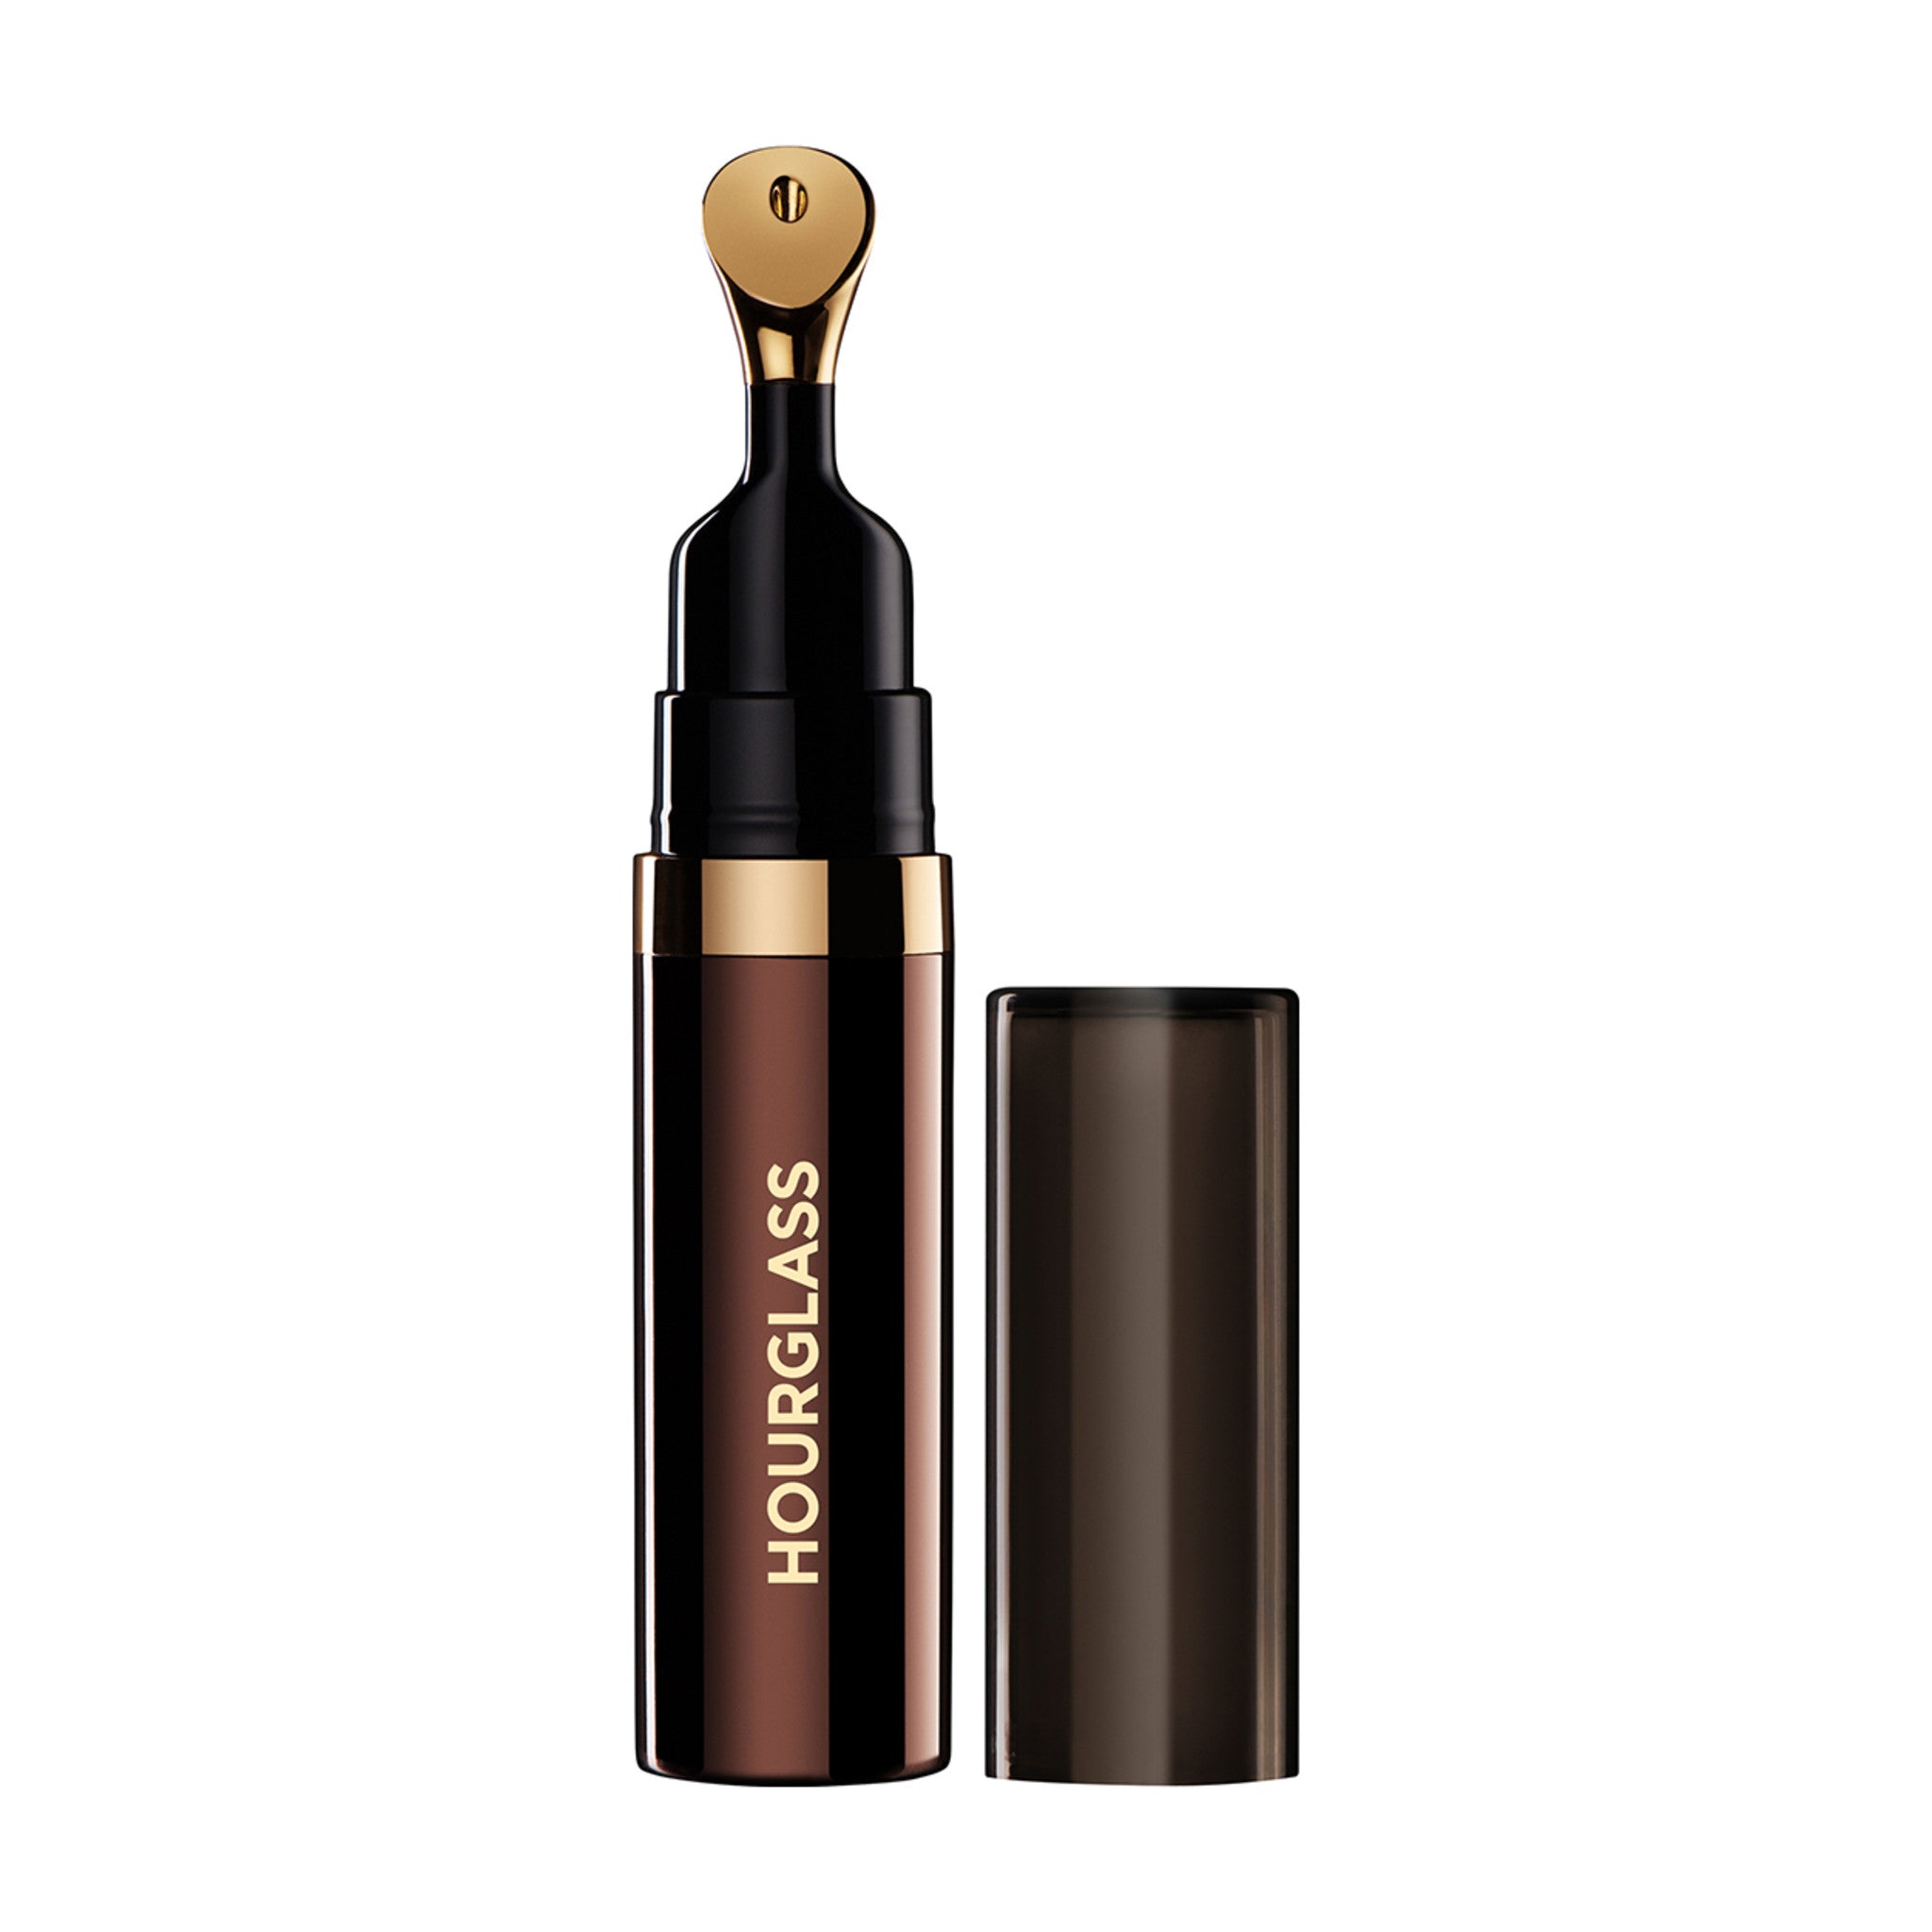 Hourglass No. 28 Lip Treatment Oil Color/Shade variant: Clear main image. This product is in the color blue